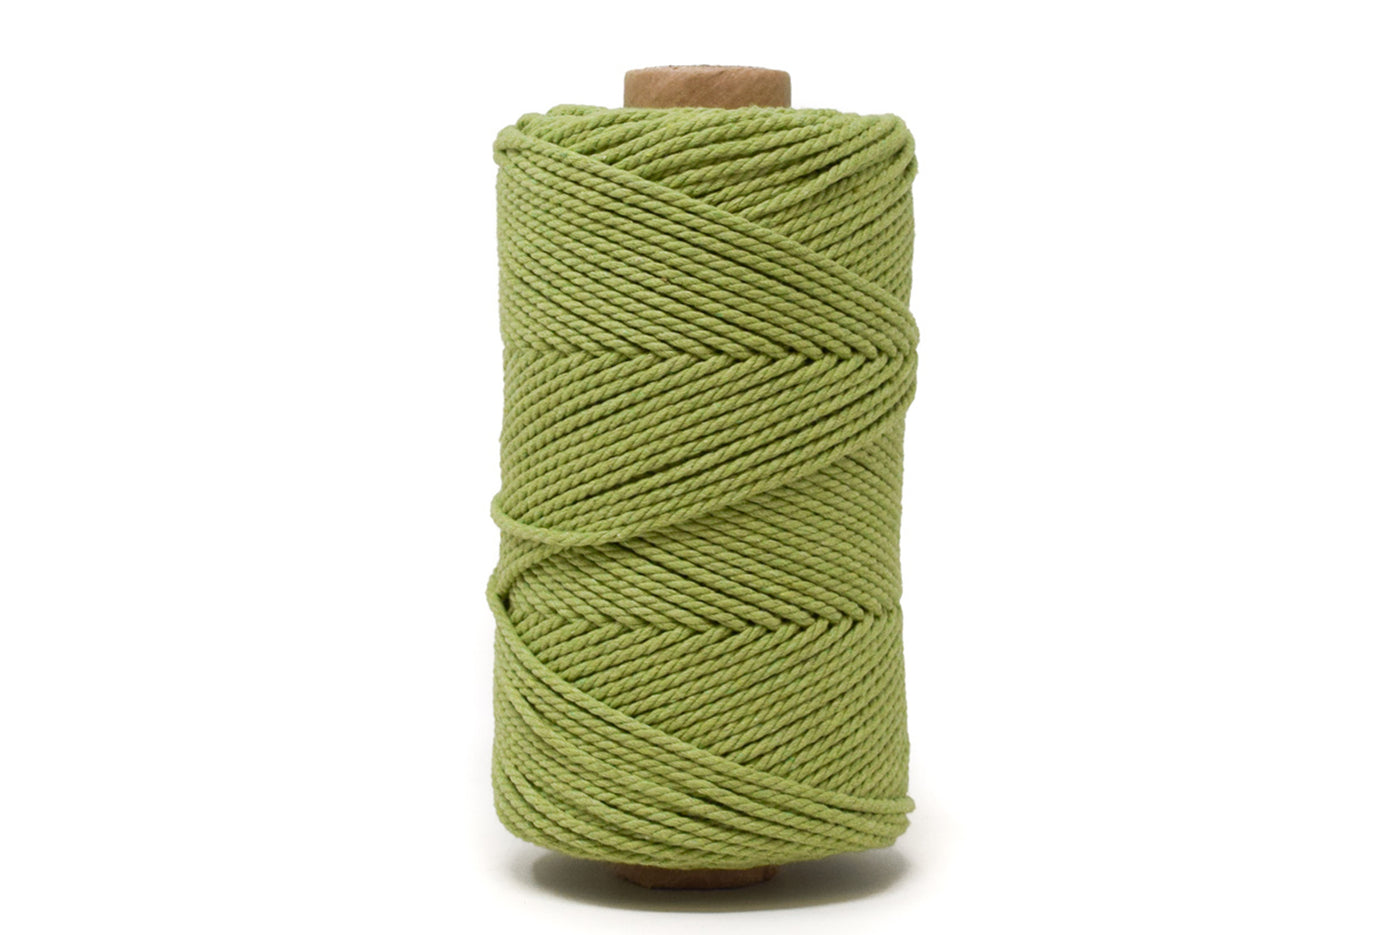 COTTON ROPE ZERO WASTE 2 MM - 3 PLY - APPLE GREEN COLOR